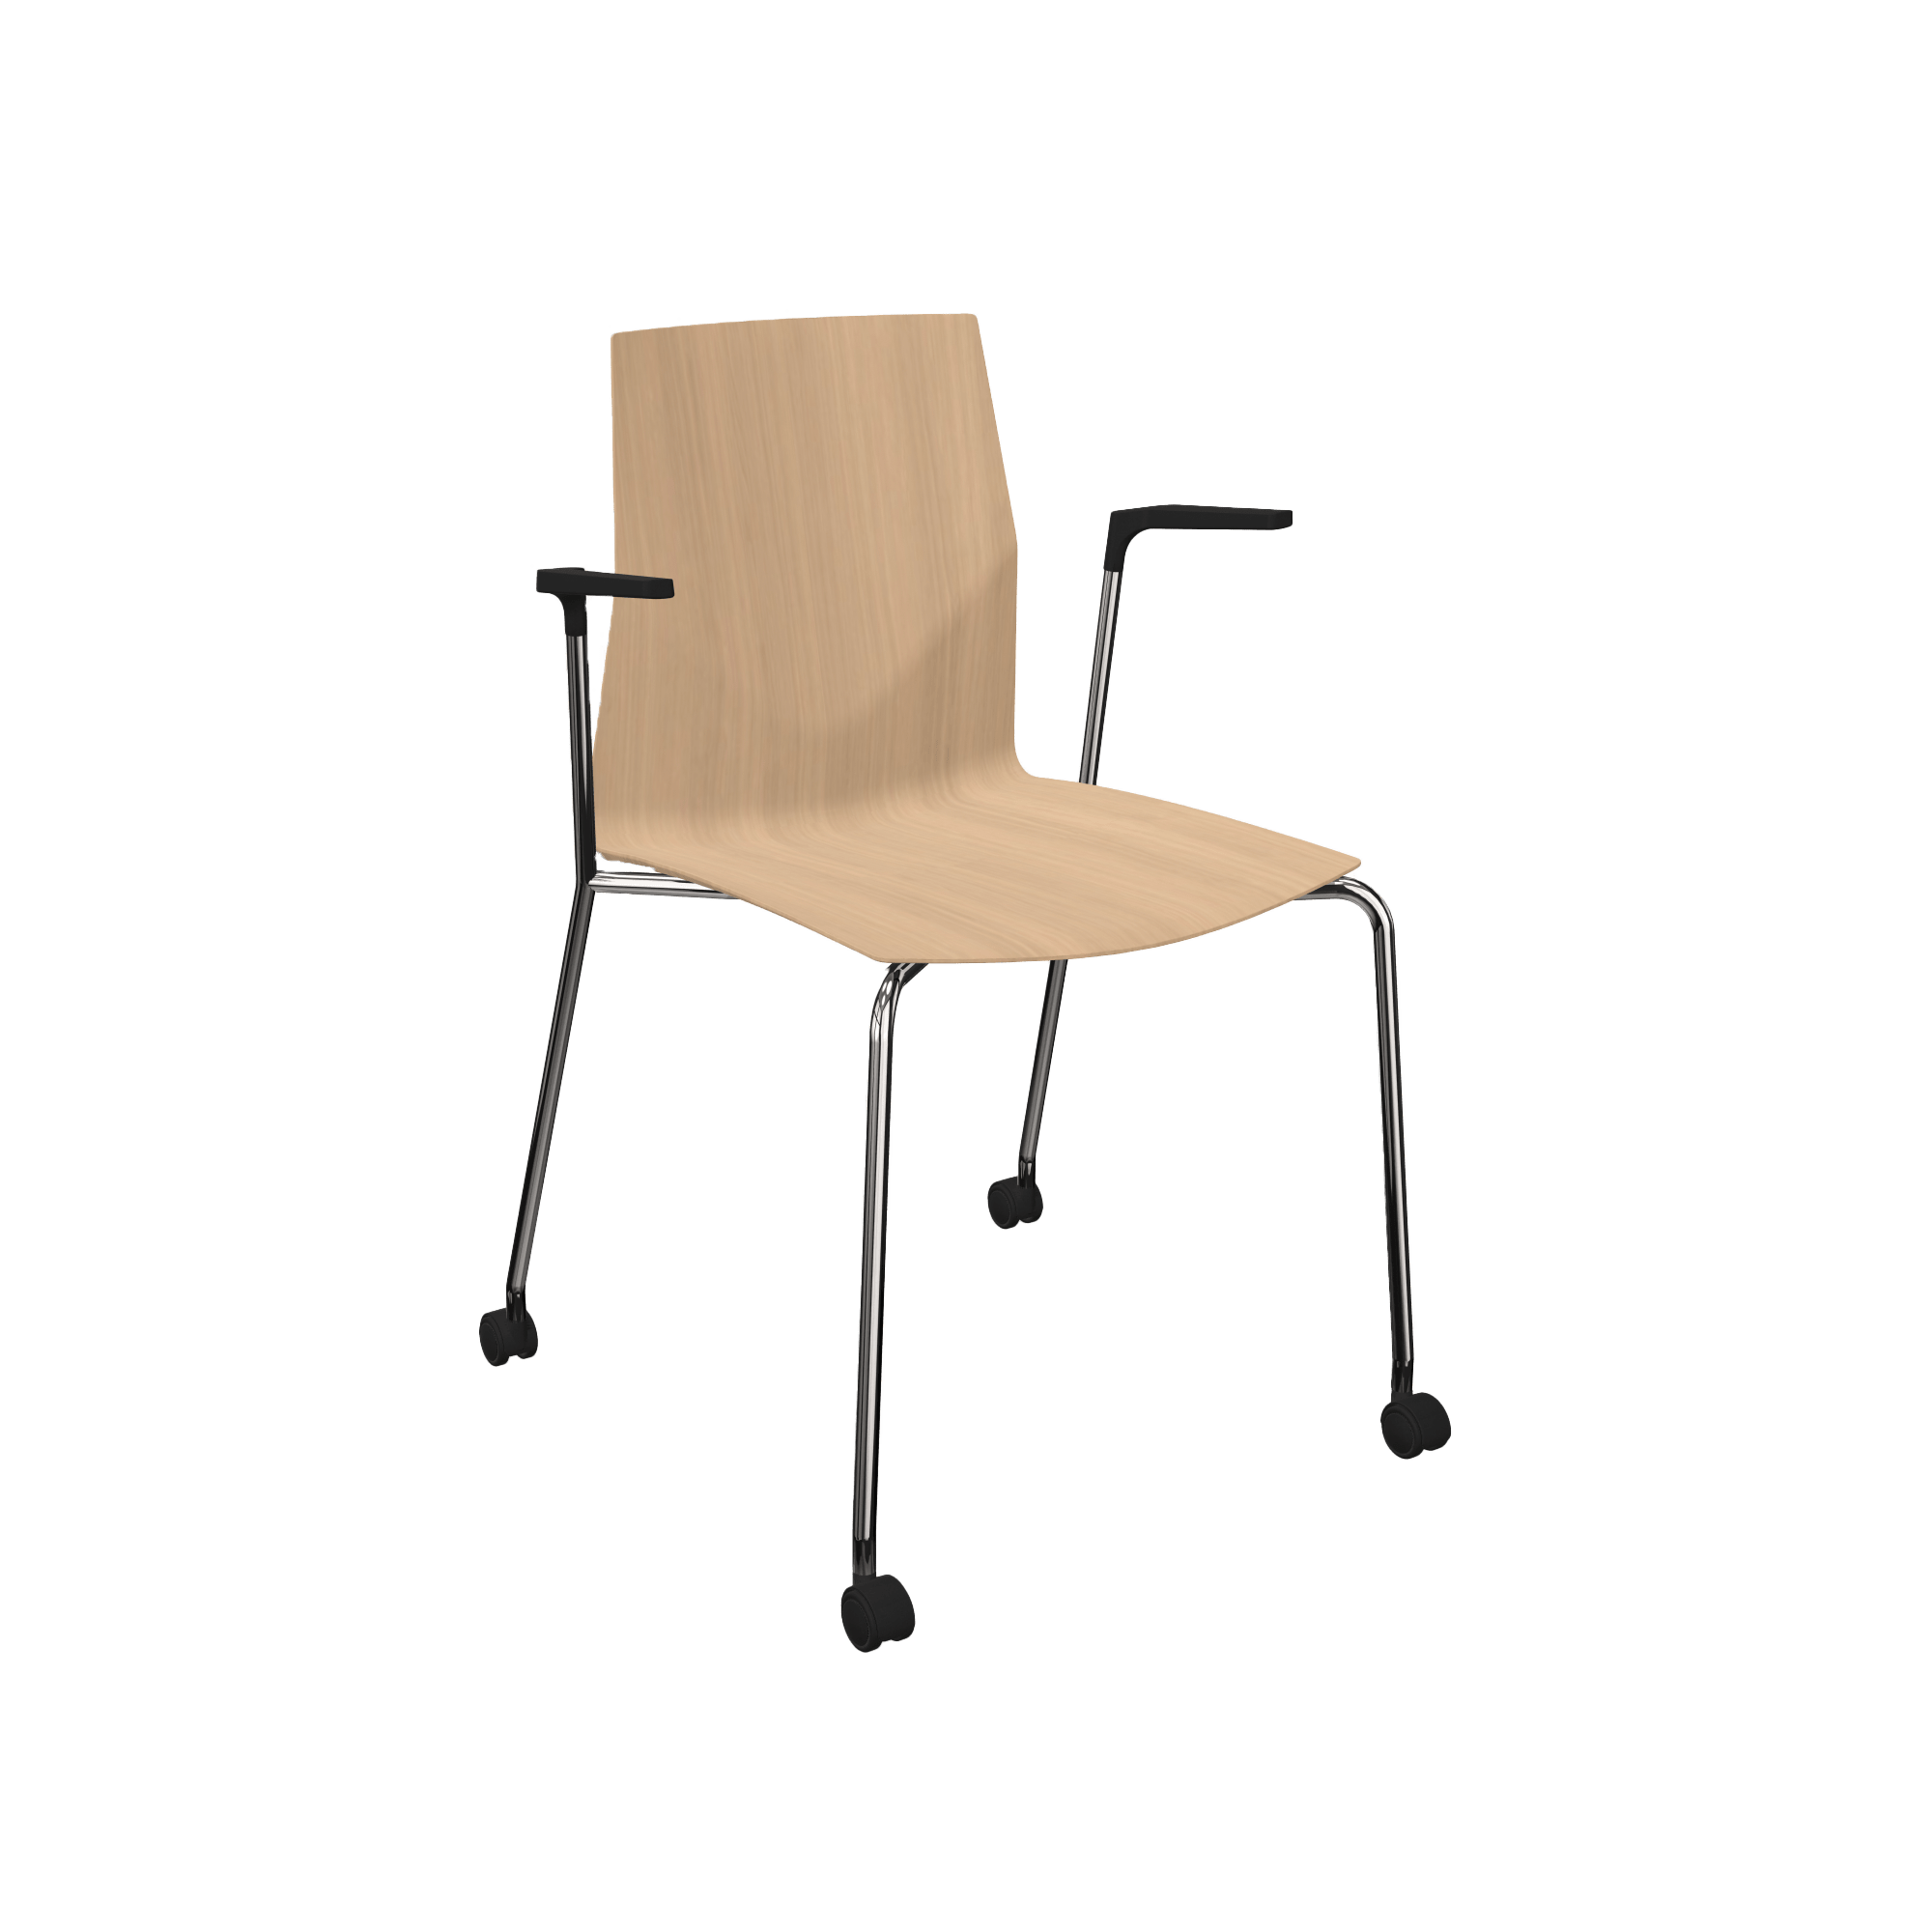 A wooden chair with arms